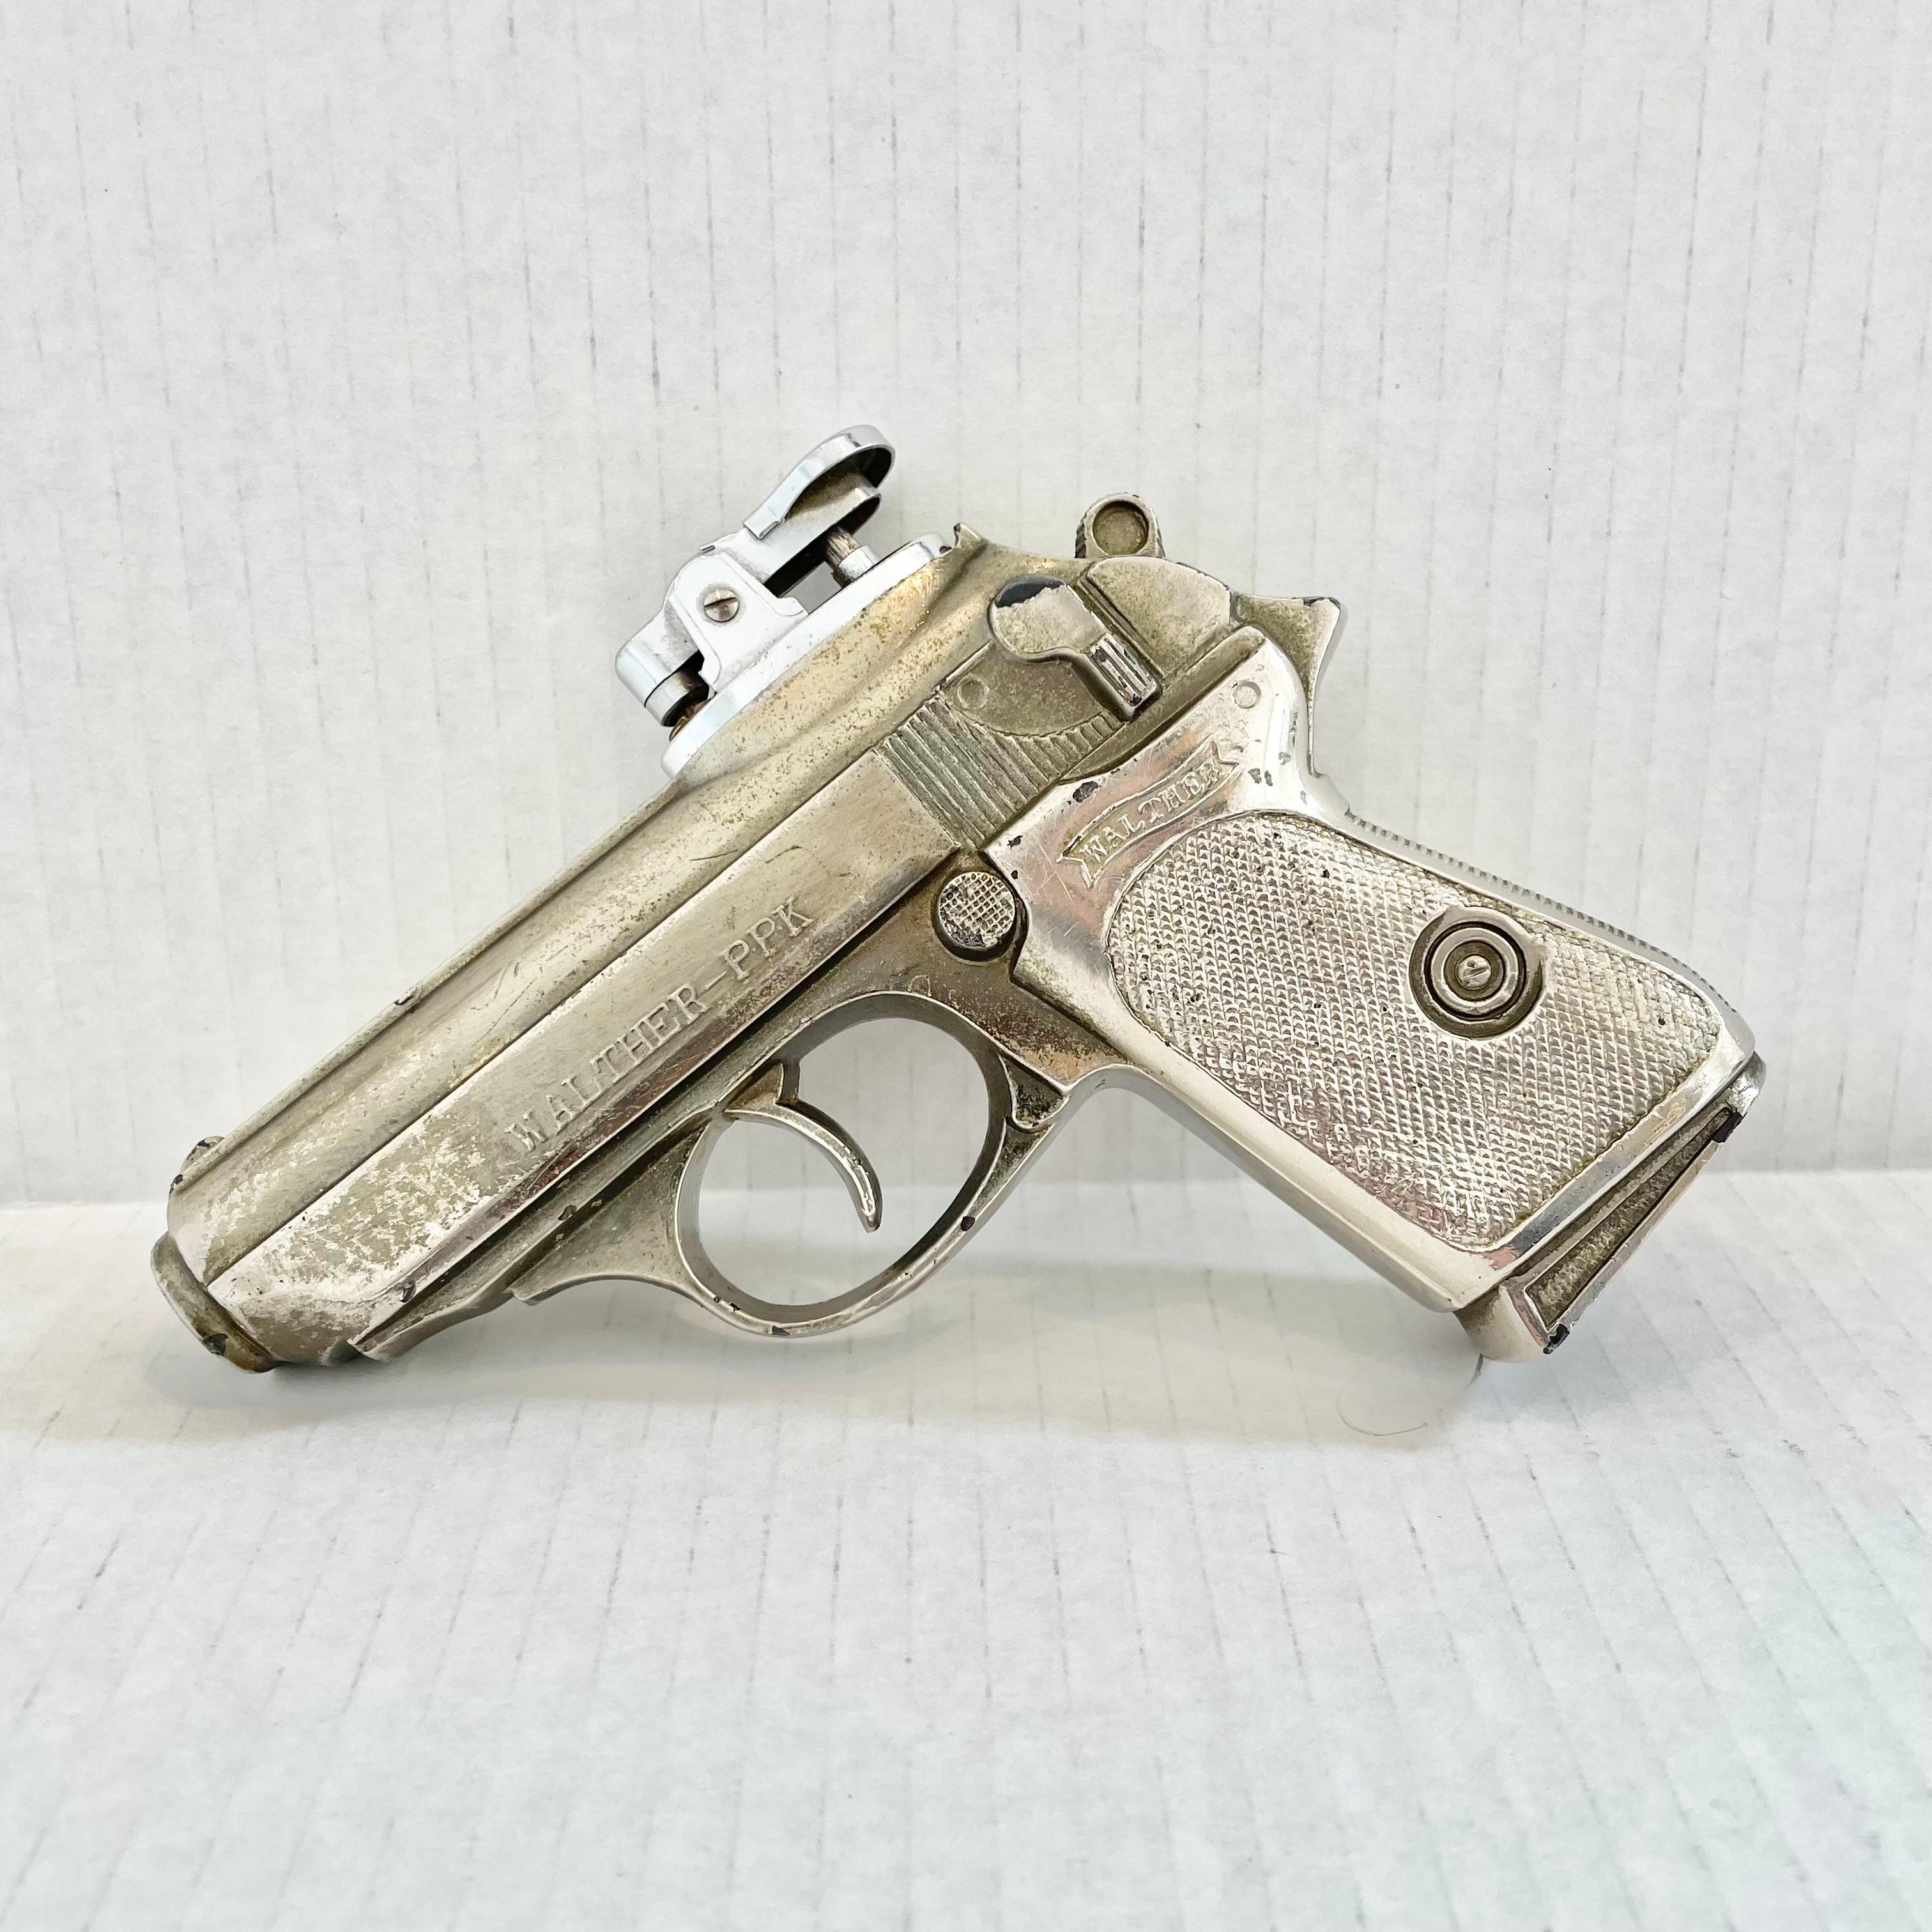 Japanese Walther PPK Table Lighter, 1980s Japan